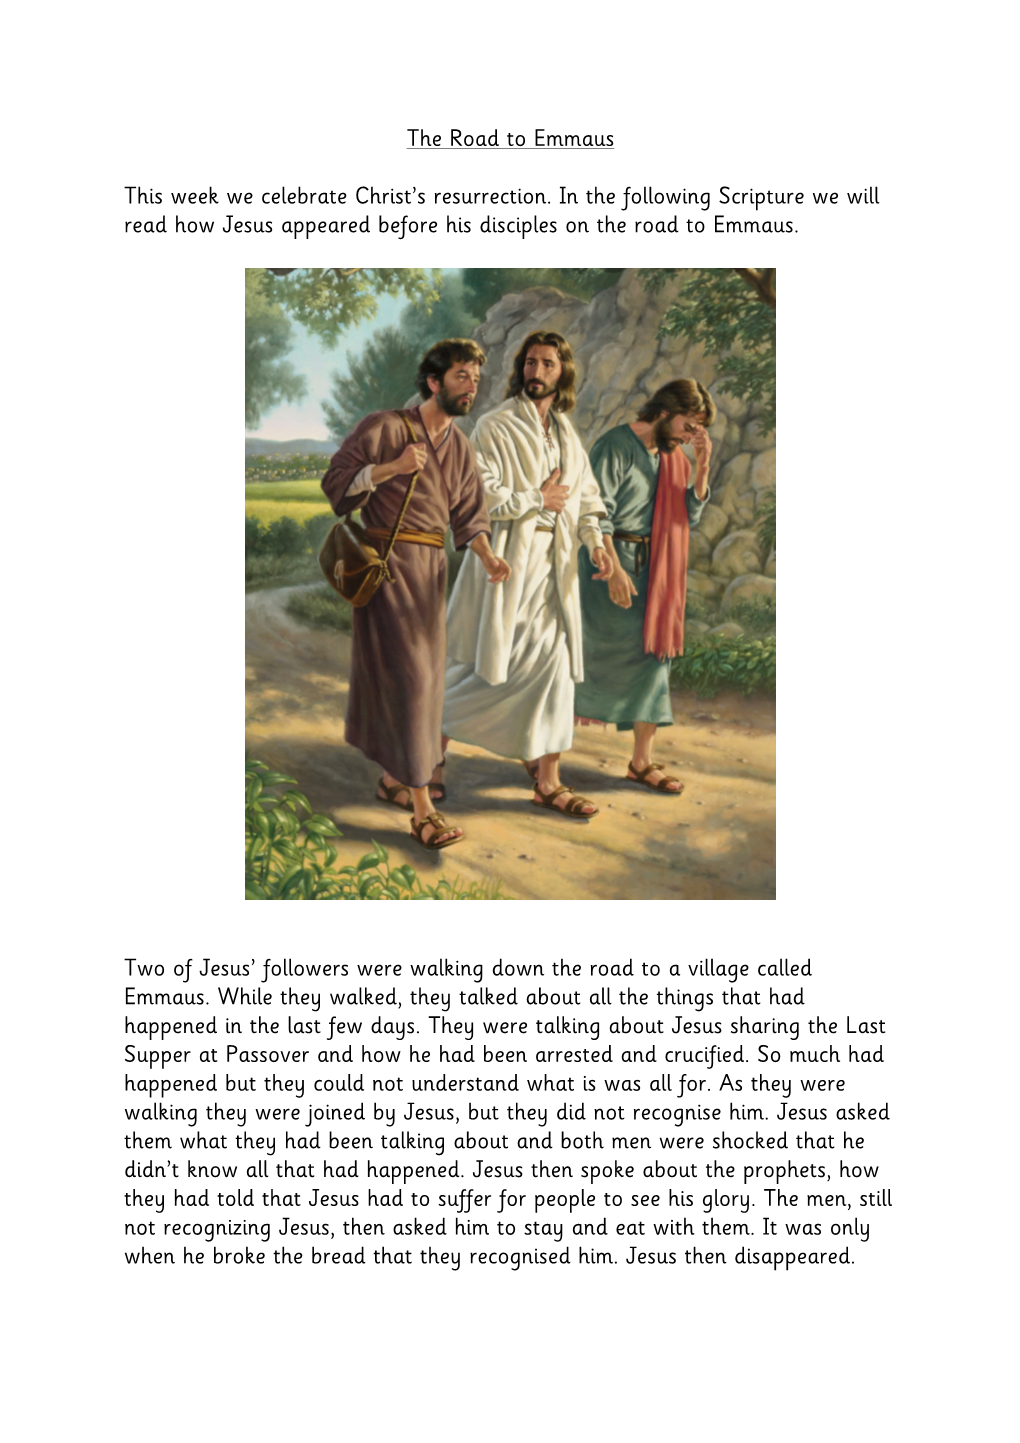 The Road to Emmaus This Week We Celebrate Christ's Resurrection. In